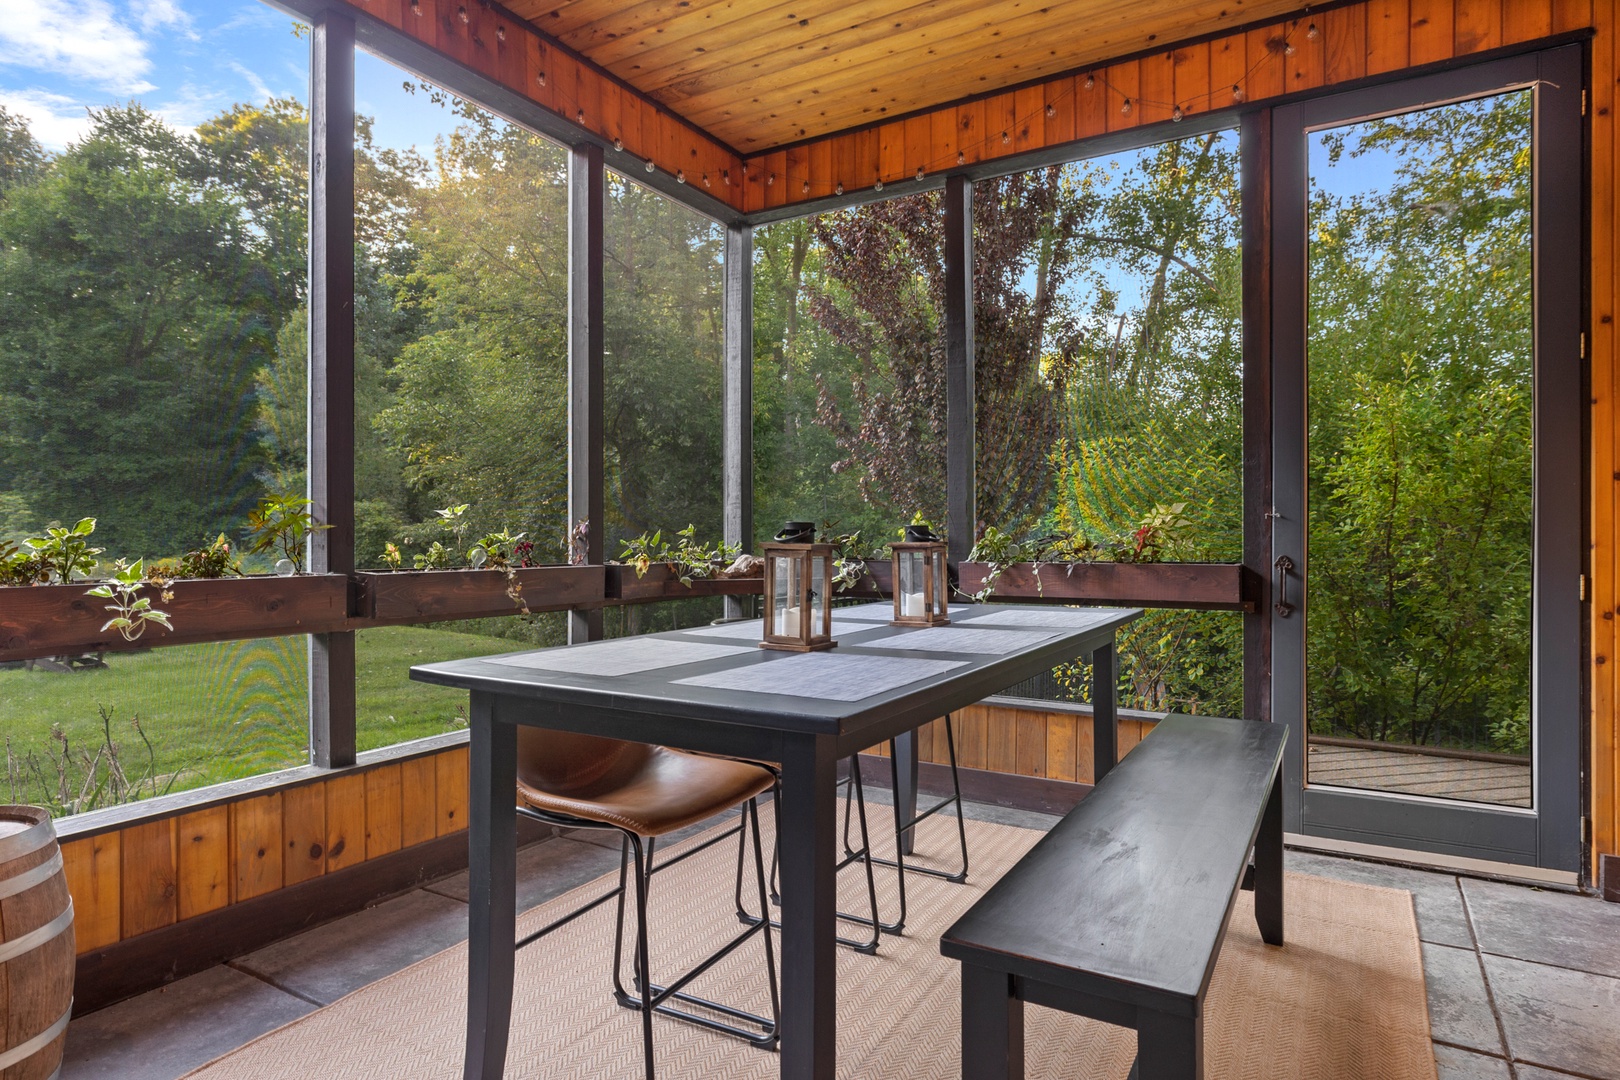 Connect with nature when dinner is served on the porch’s beautiful dining table.